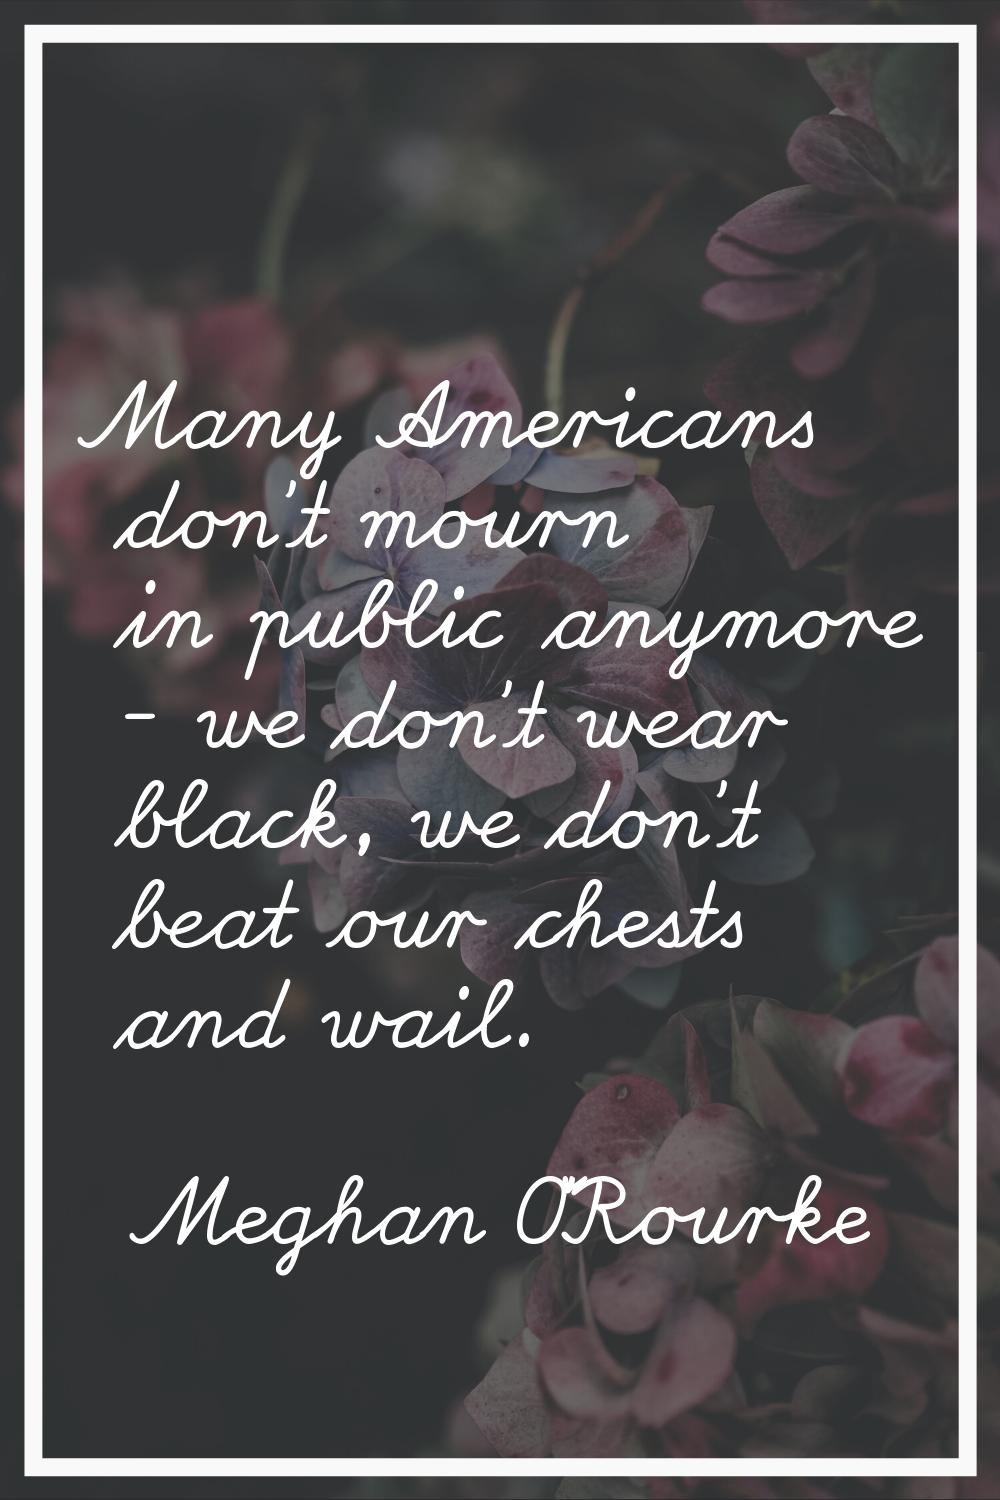 Many Americans don't mourn in public anymore - we don't wear black, we don't beat our chests and wa